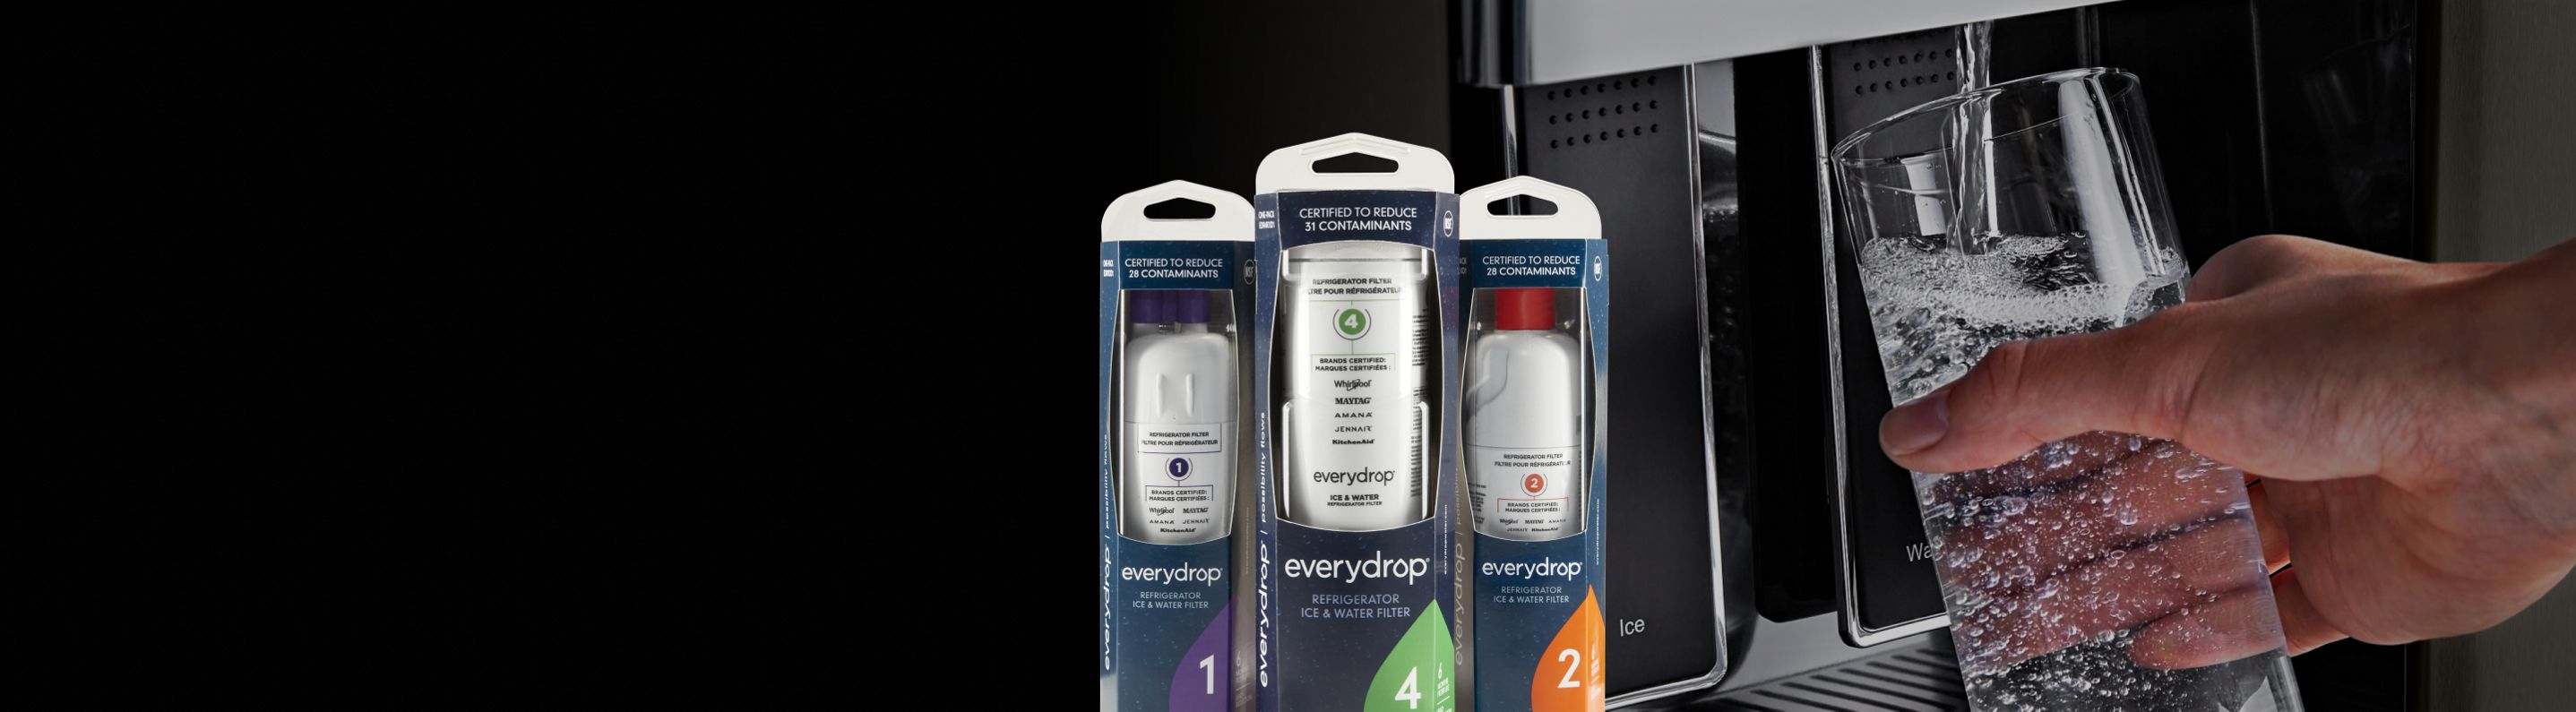 Everydrop brand water filters next to an image of a Maytag brand refrigerator water dispenser.